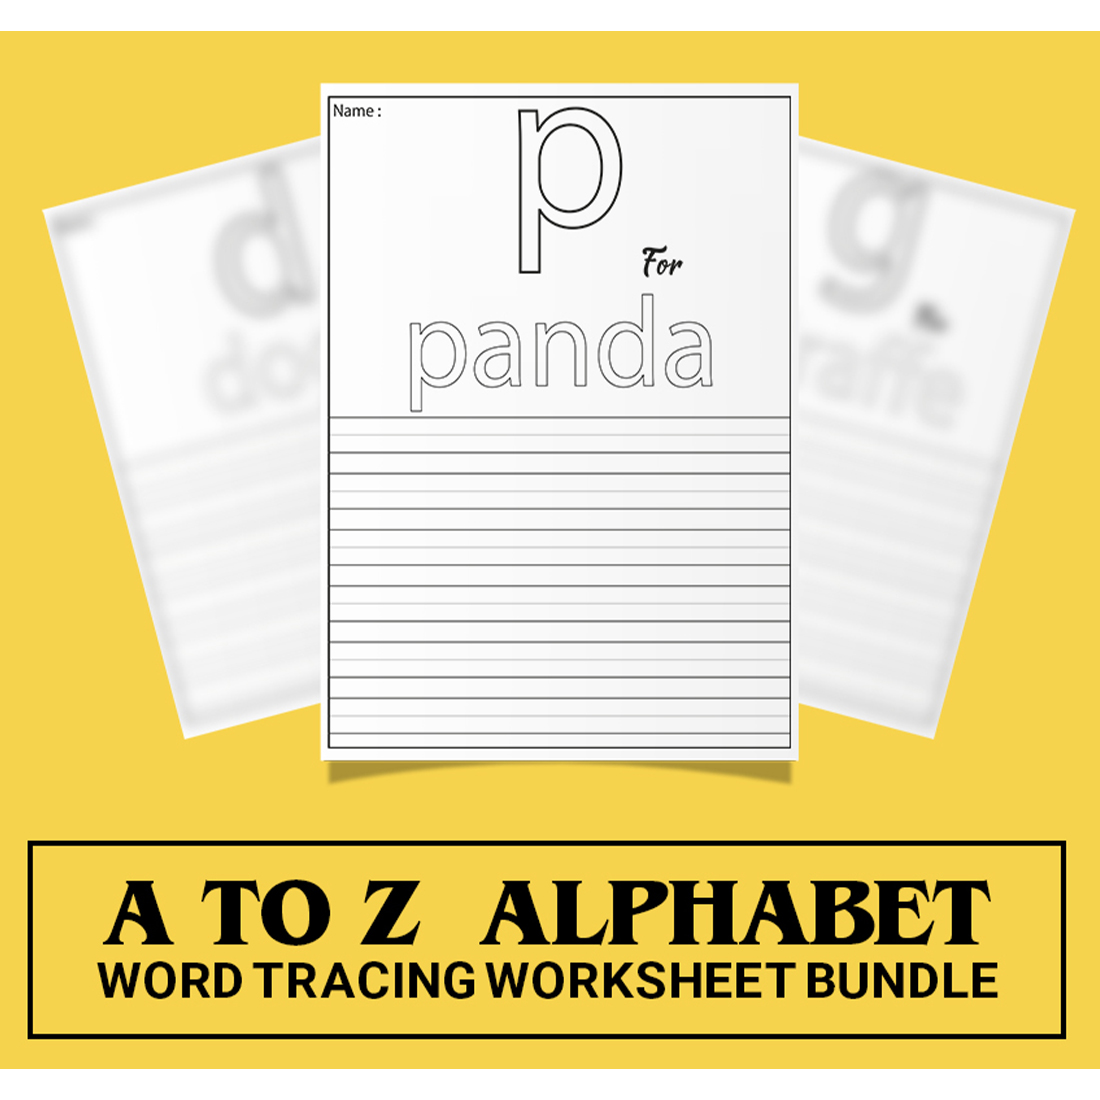 Pack of images of exquisite worksheets for learning letters